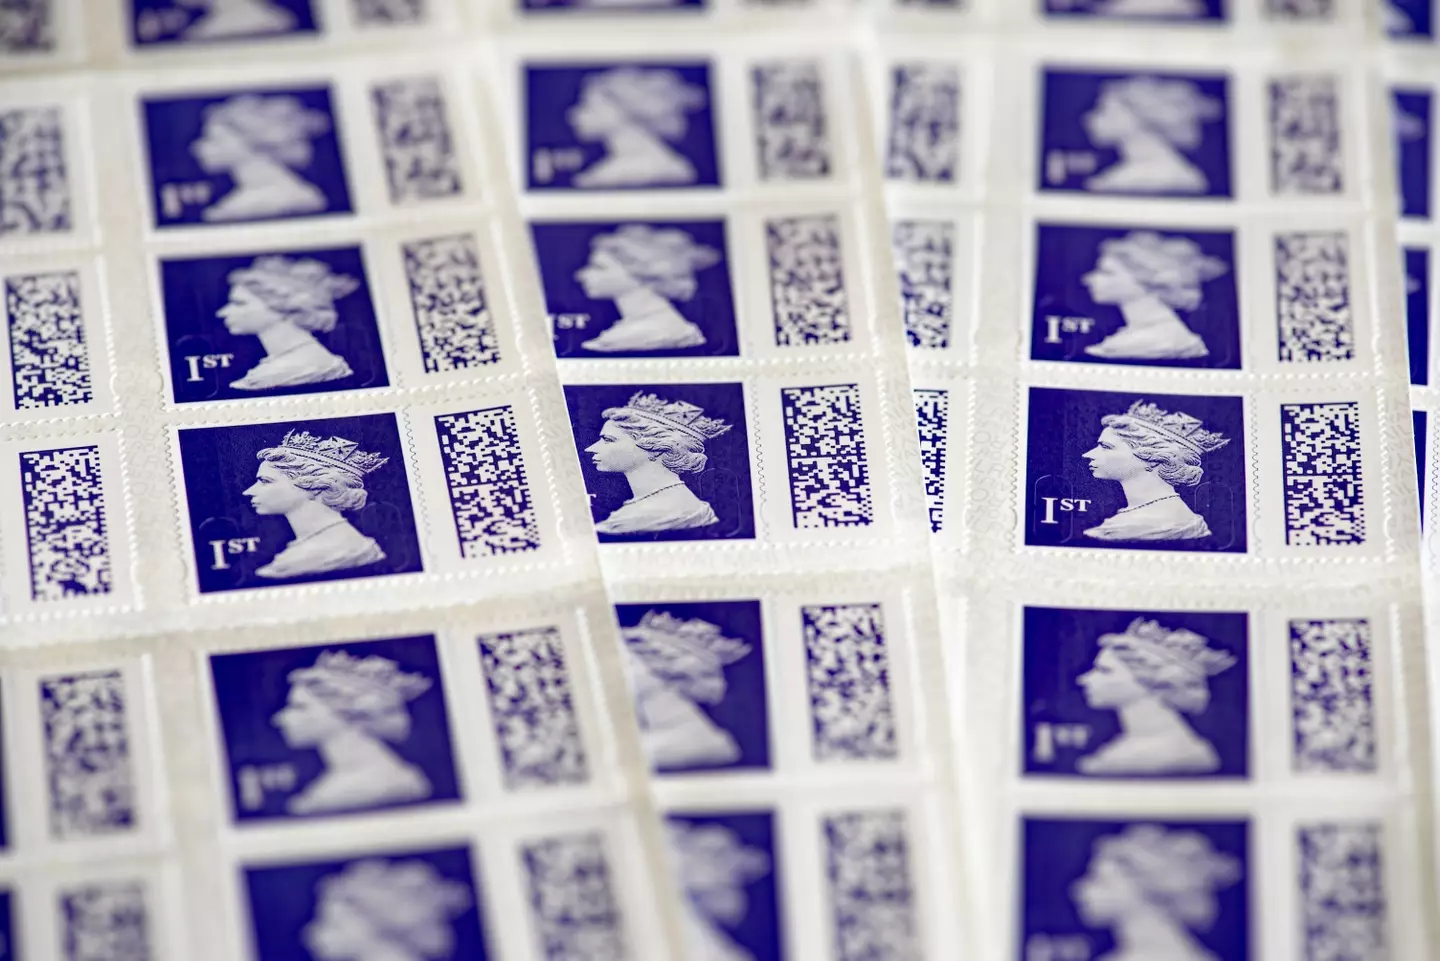 The barcoded stamps were introduced earlier this year.